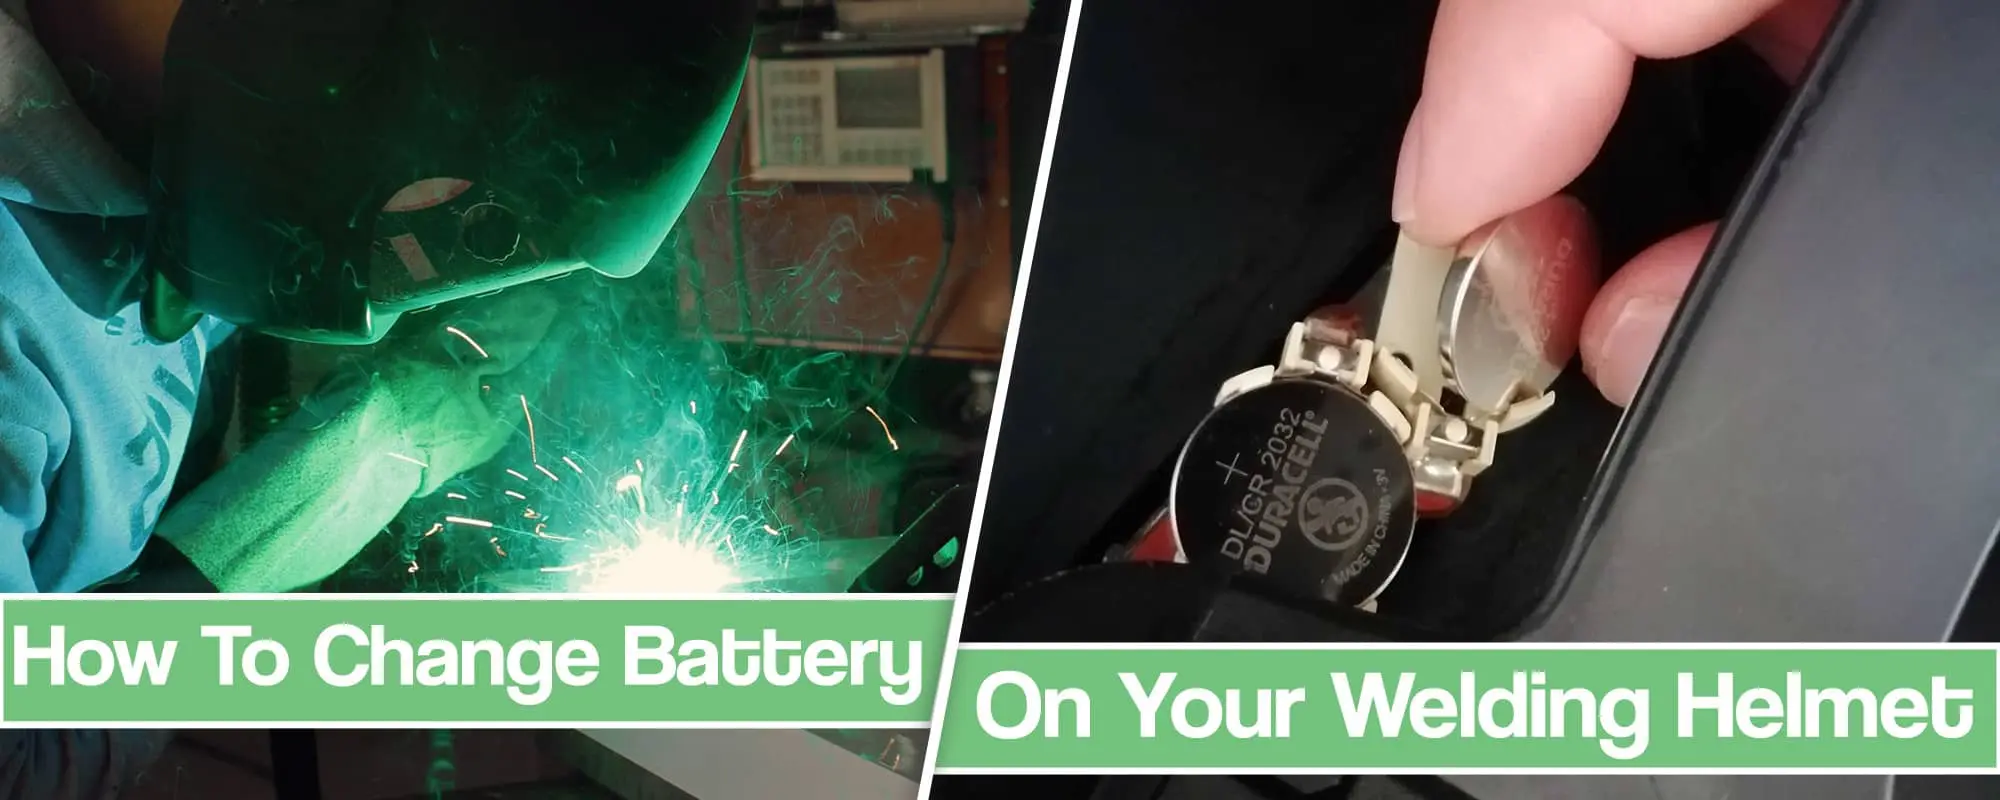 Feature image for How To Change The Battery In Your Welding Helmet article